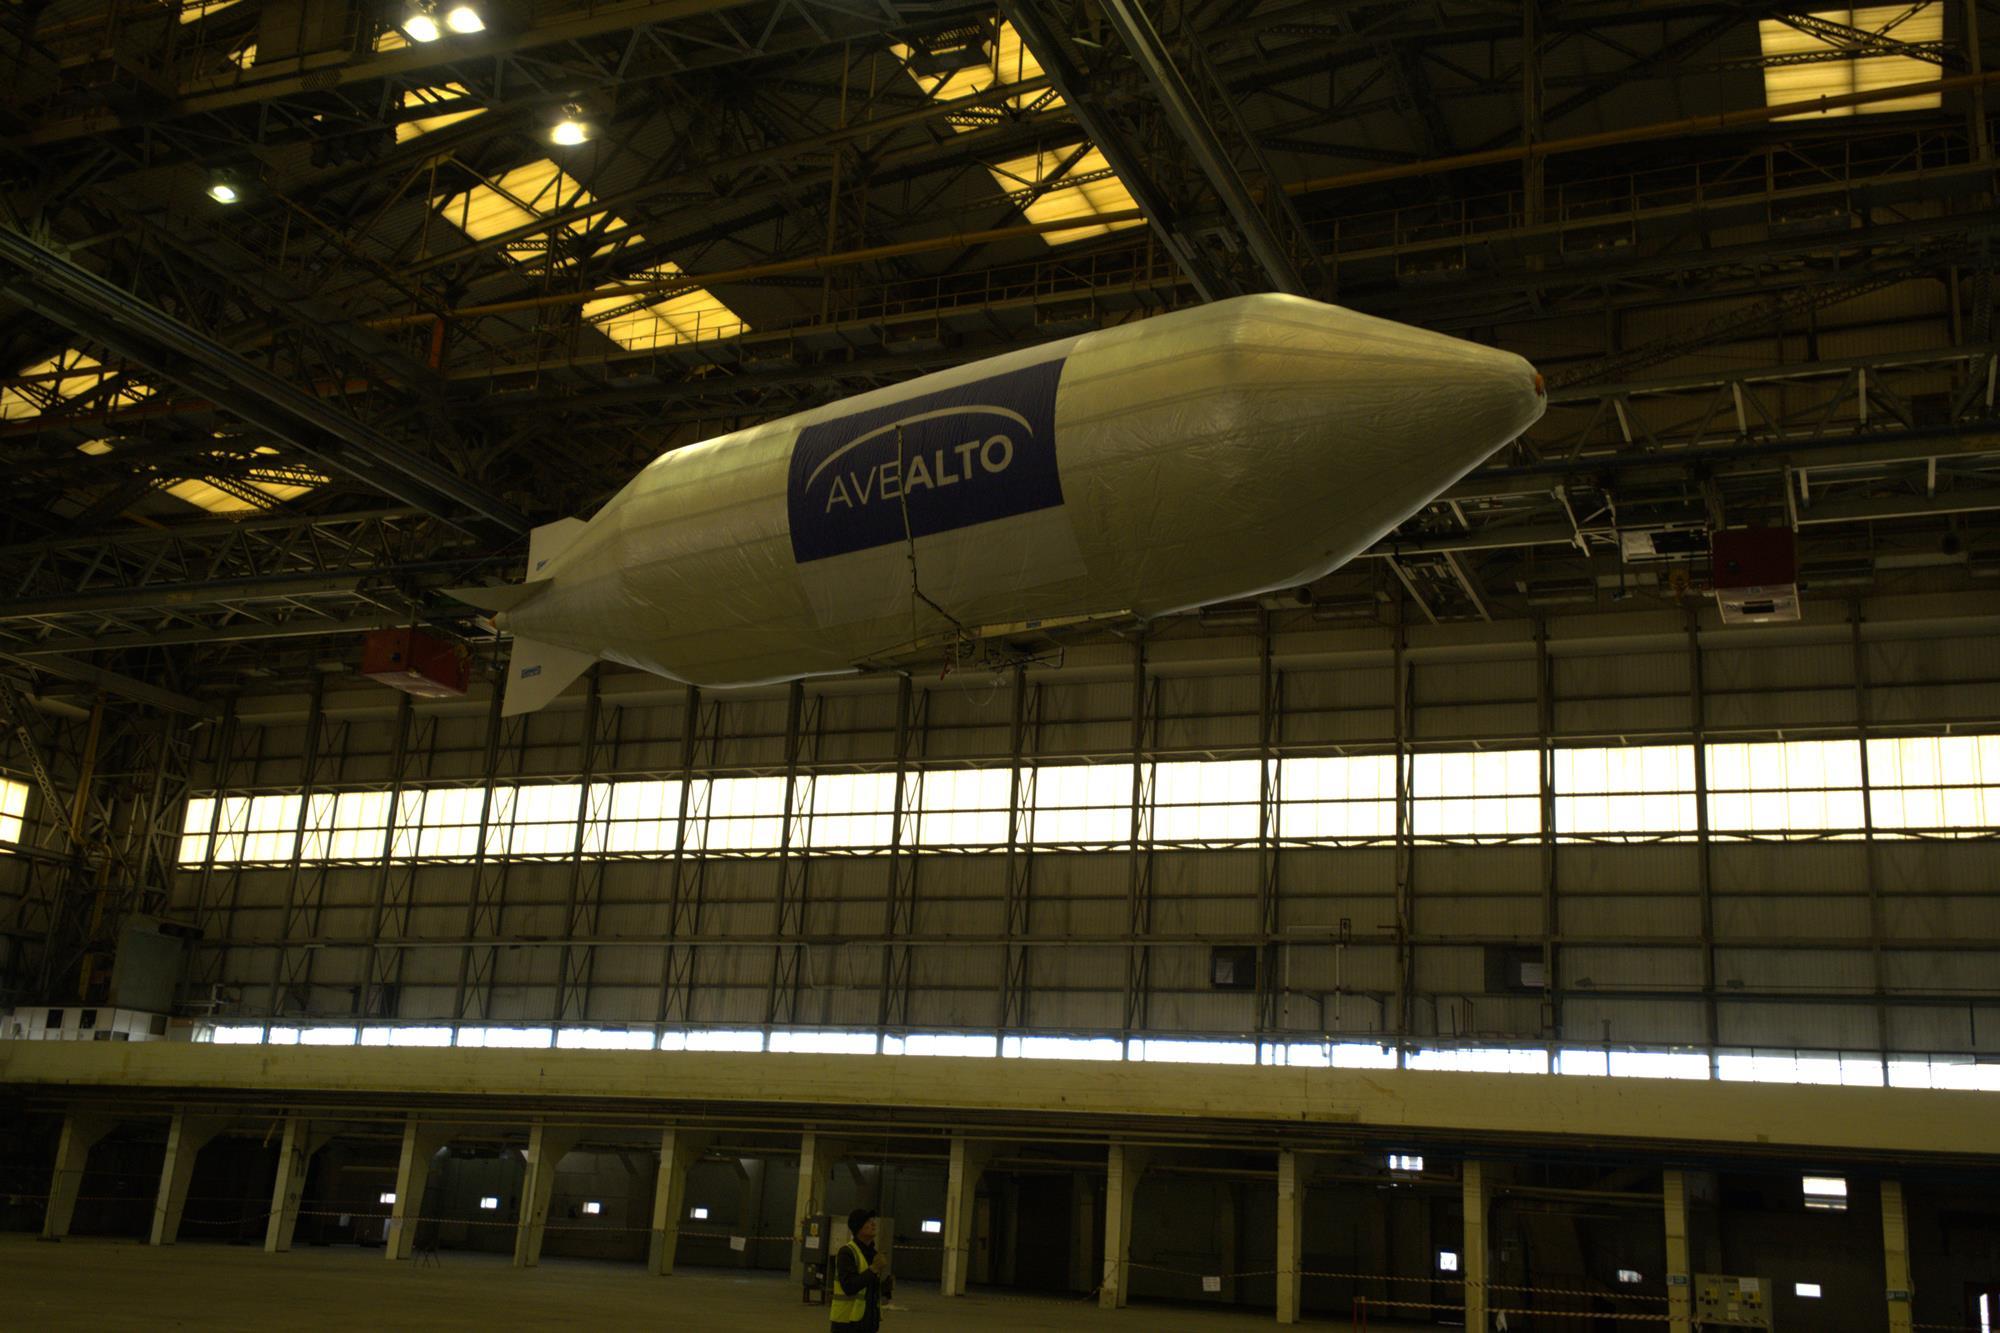 Thales Stratobus to launch into stratosphere